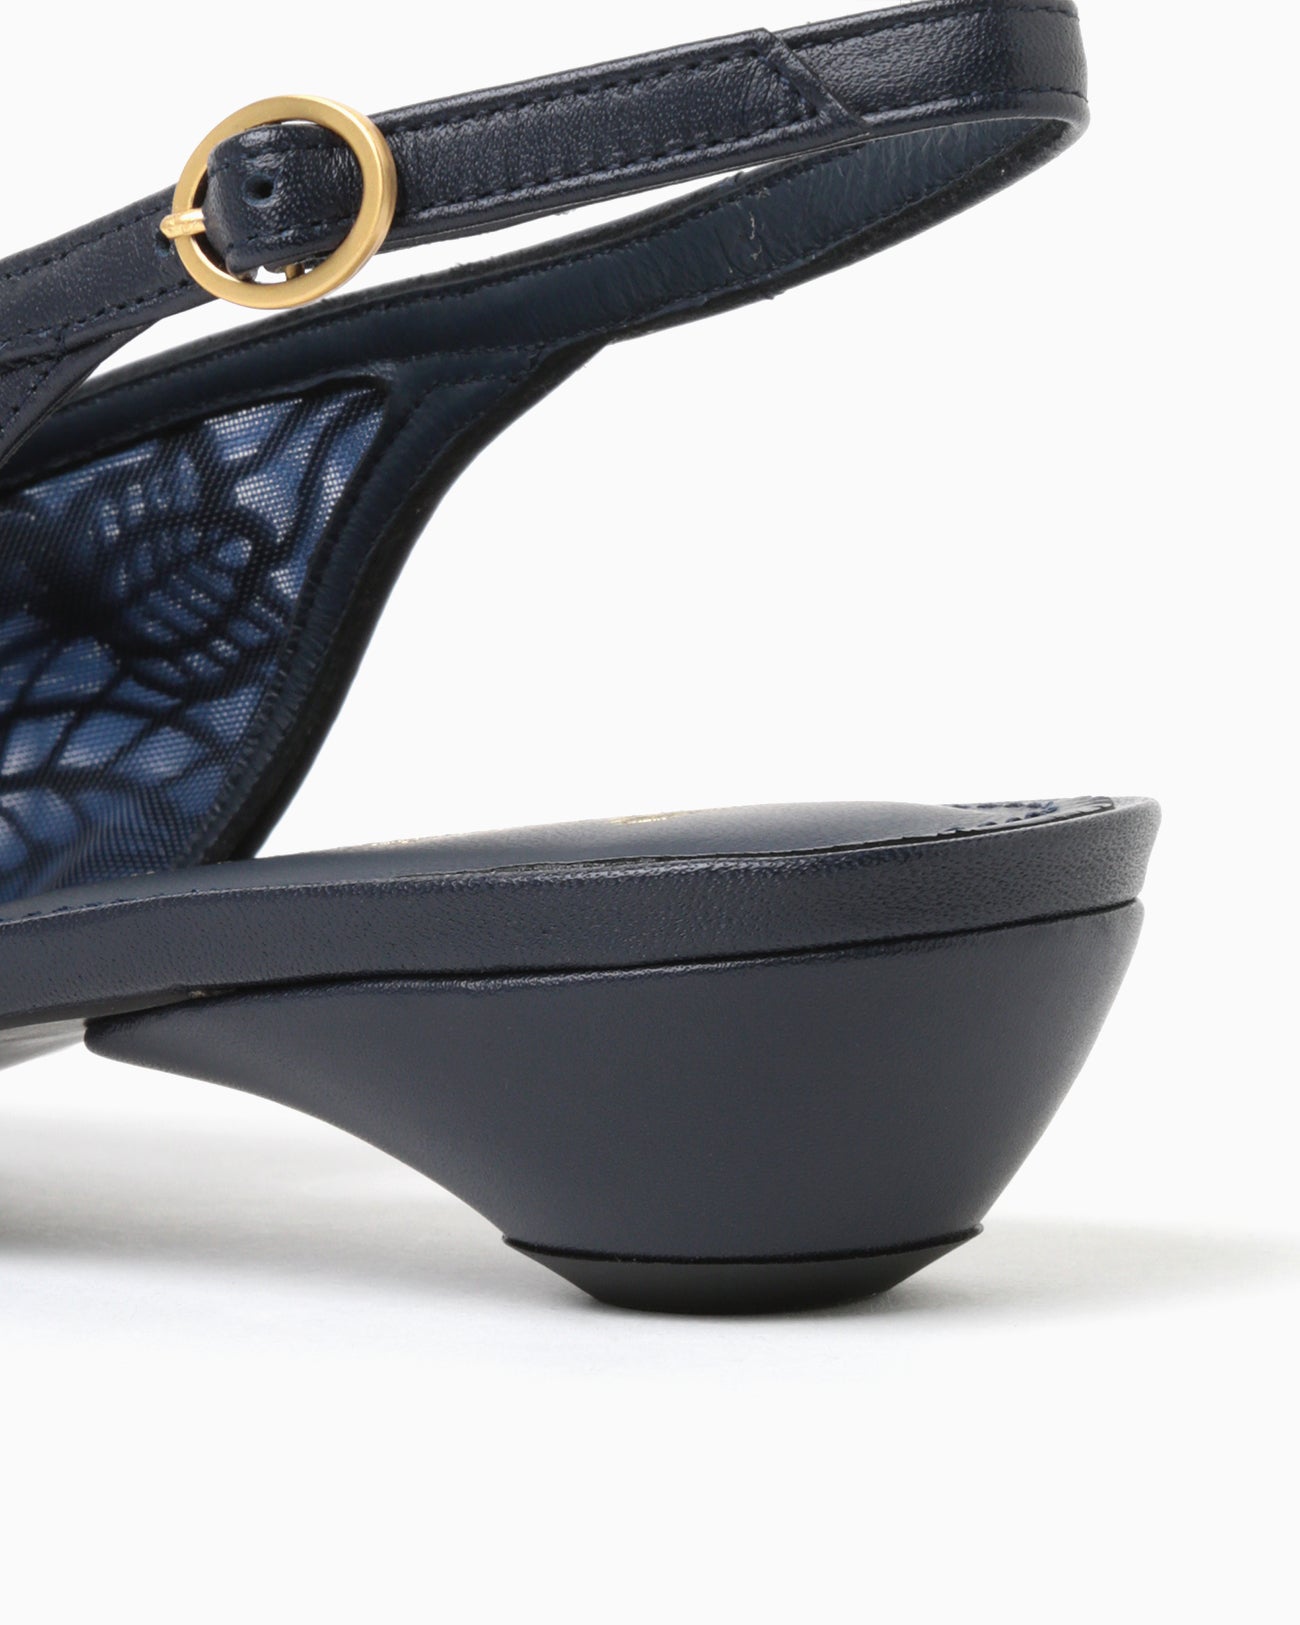 Cording Embroidery Sling Back Heels - navy